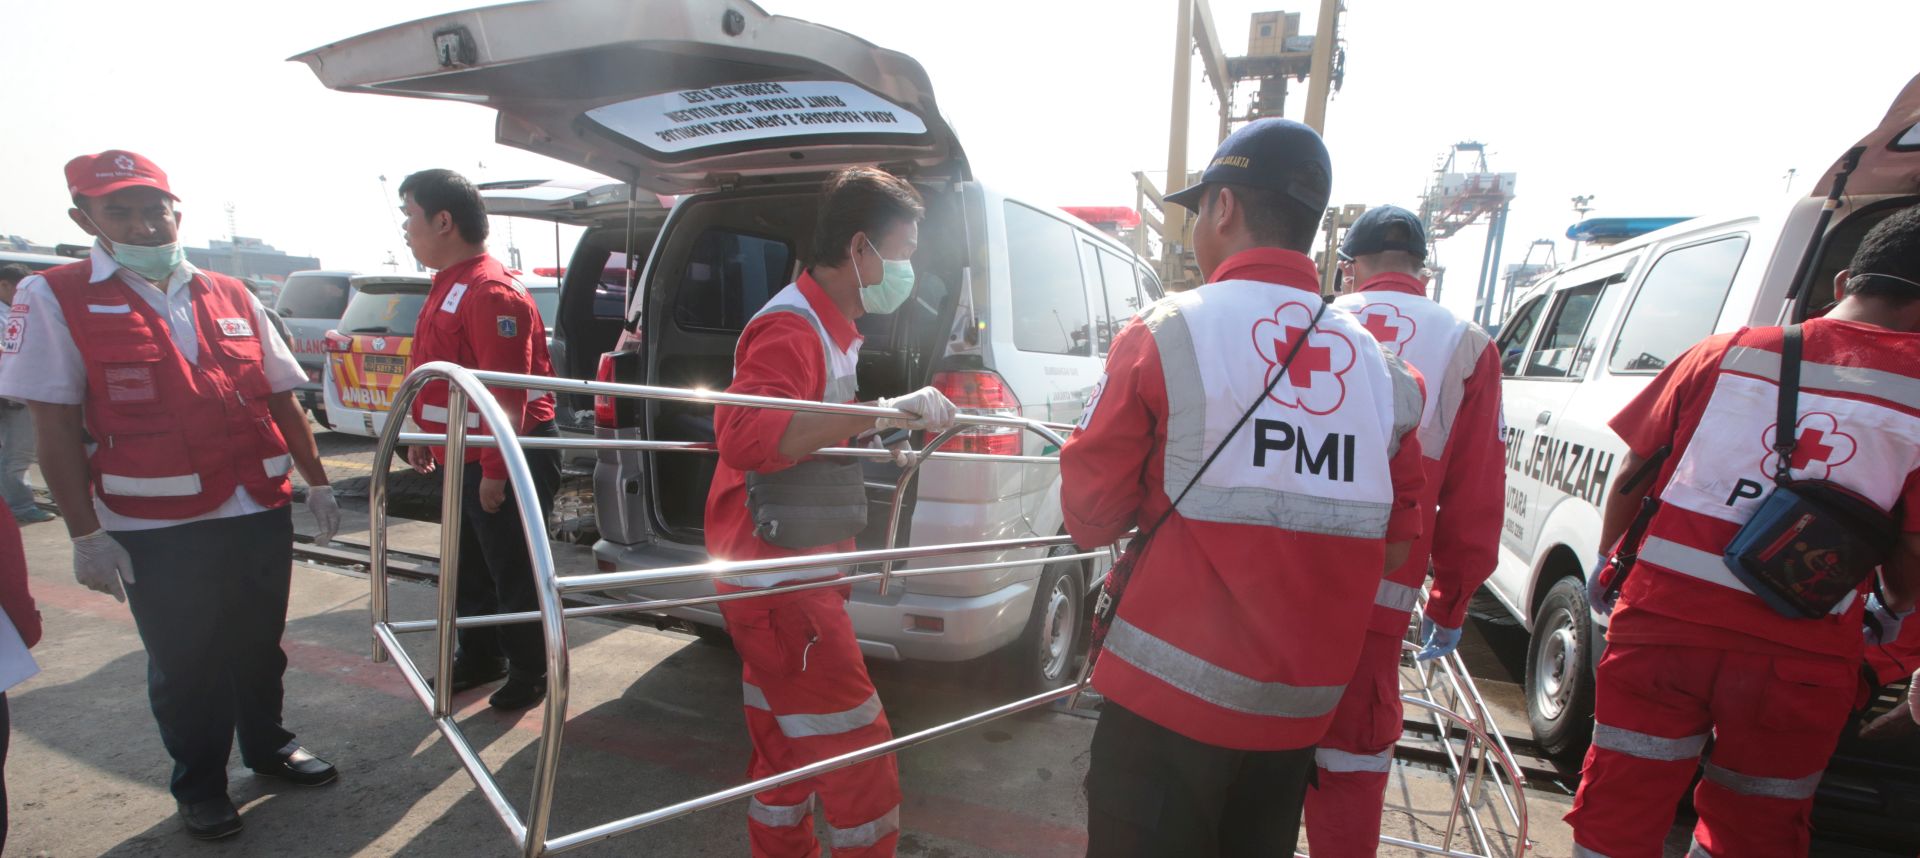 epa07128604 Members of an Indonesian rescue team prepare for the evacuation of a body of the plane crash victims at Tanjung Priok Harbour, Indonesia, 29 October 2018. According to media reports on 29 October 2018, Lion Air flight JT-610 lost contact with air traffic controllers soon after takeoff then crashed into the sea. The flight was en route to Pangkal Pinang, and reportedly had 189 people onboard.  EPA/BAGUS INDAHONO